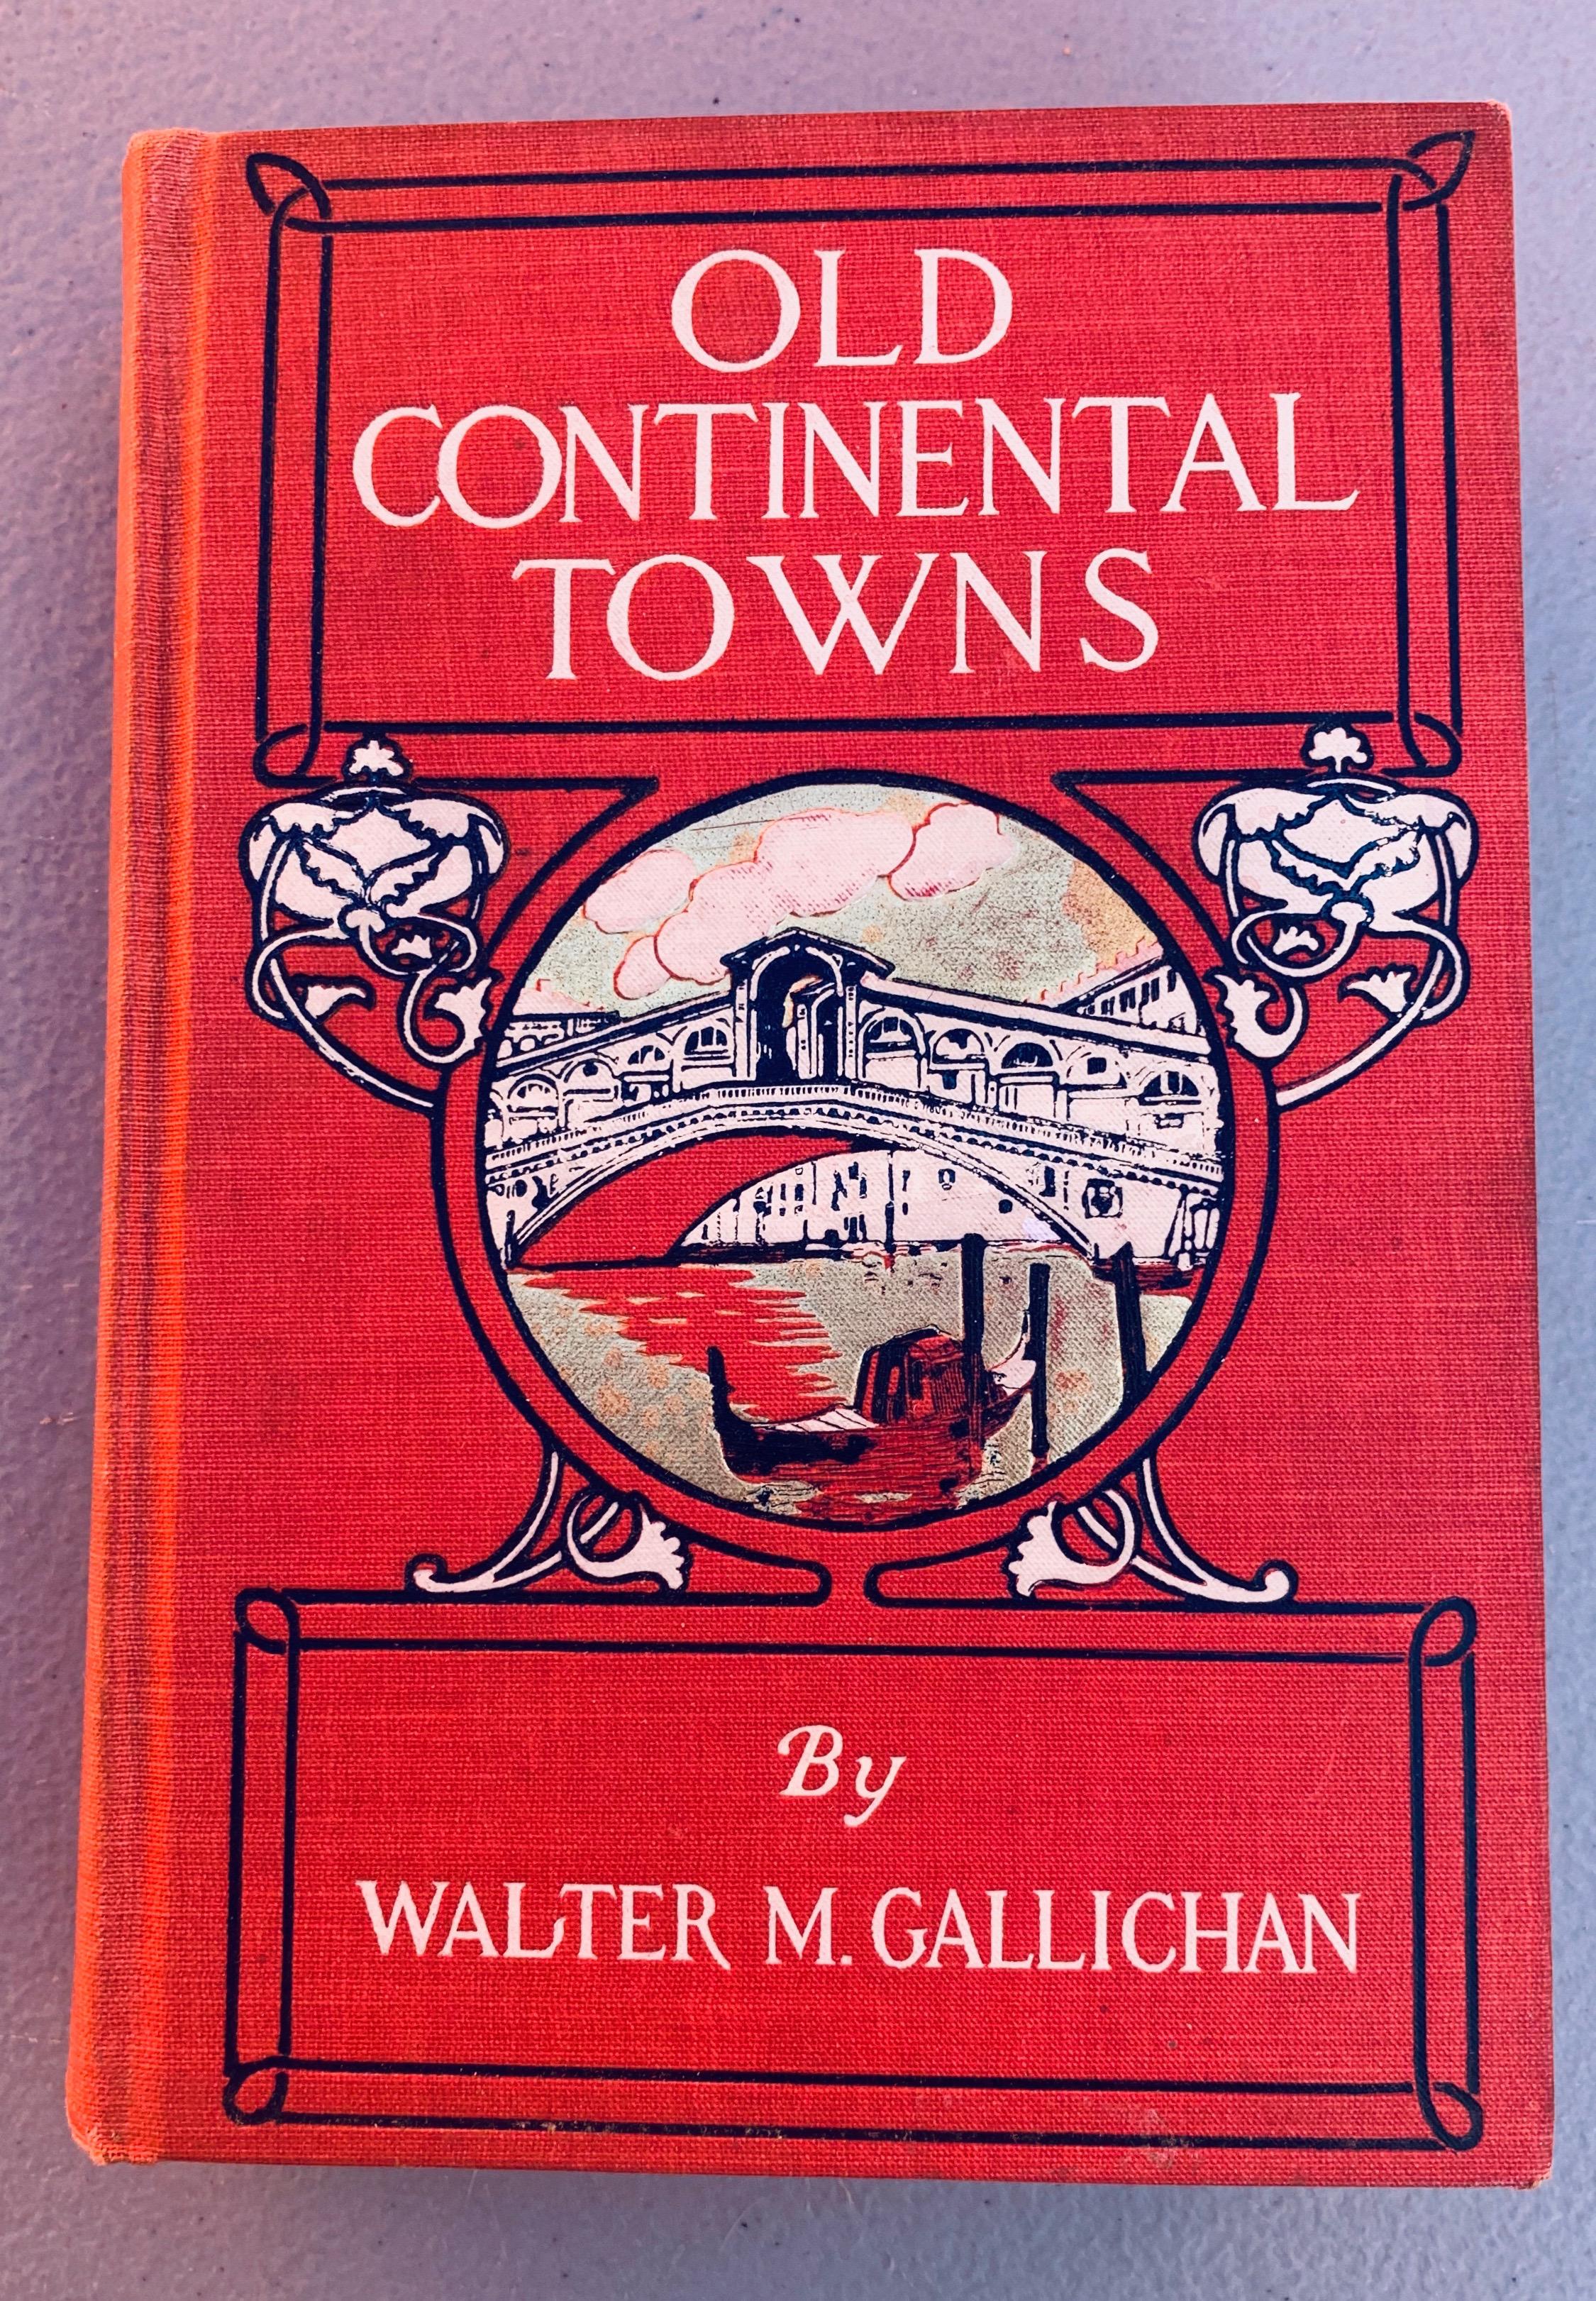 Old Continental Towns by Walter M. Gallichan (c.1910)